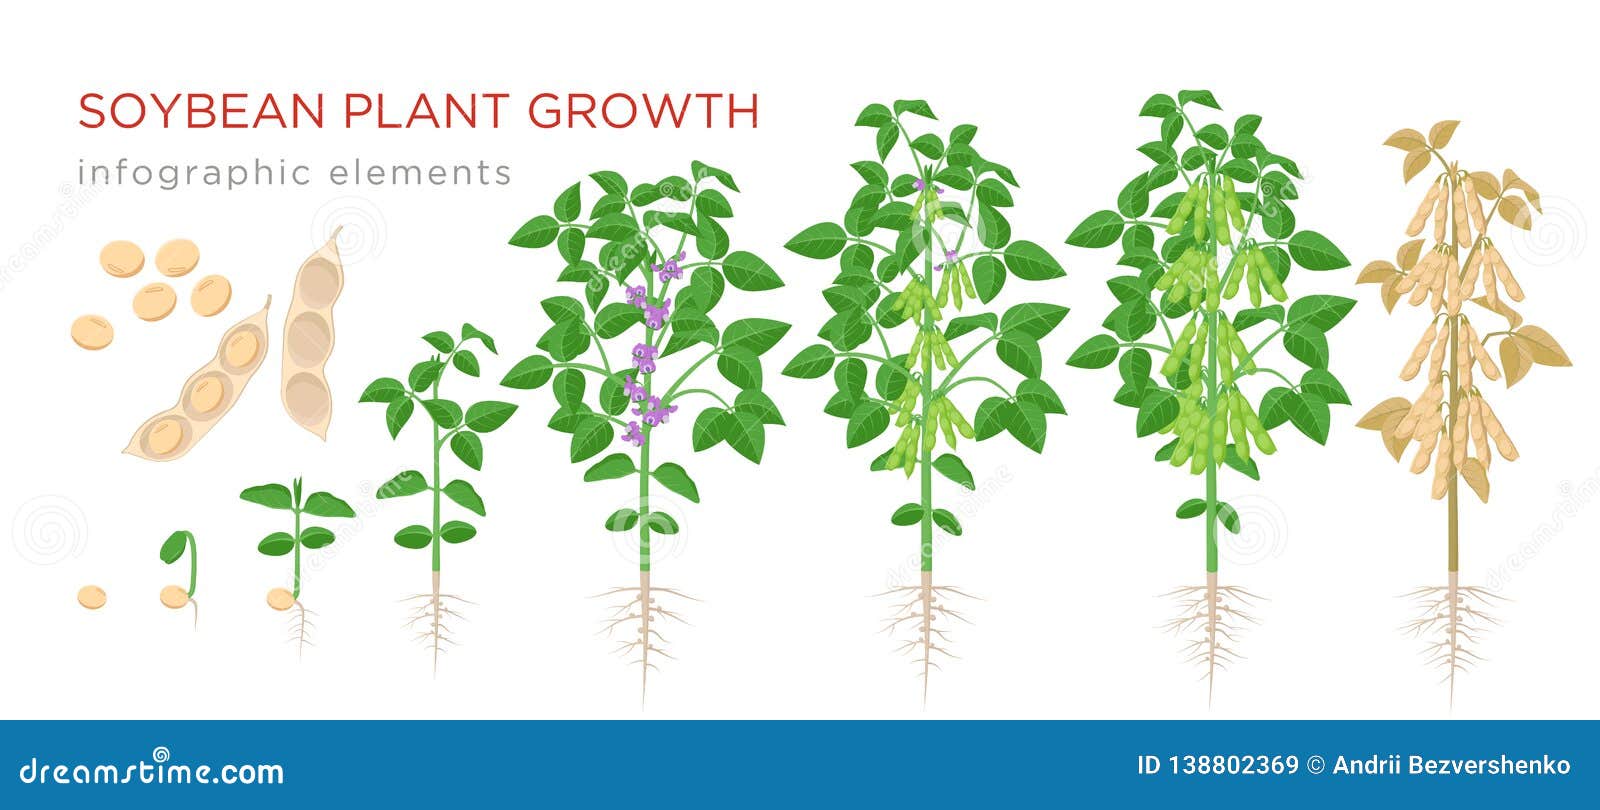 soybean plant growth stages infographic s. growing process of soya beans from seeds, sprout to mature soybeans